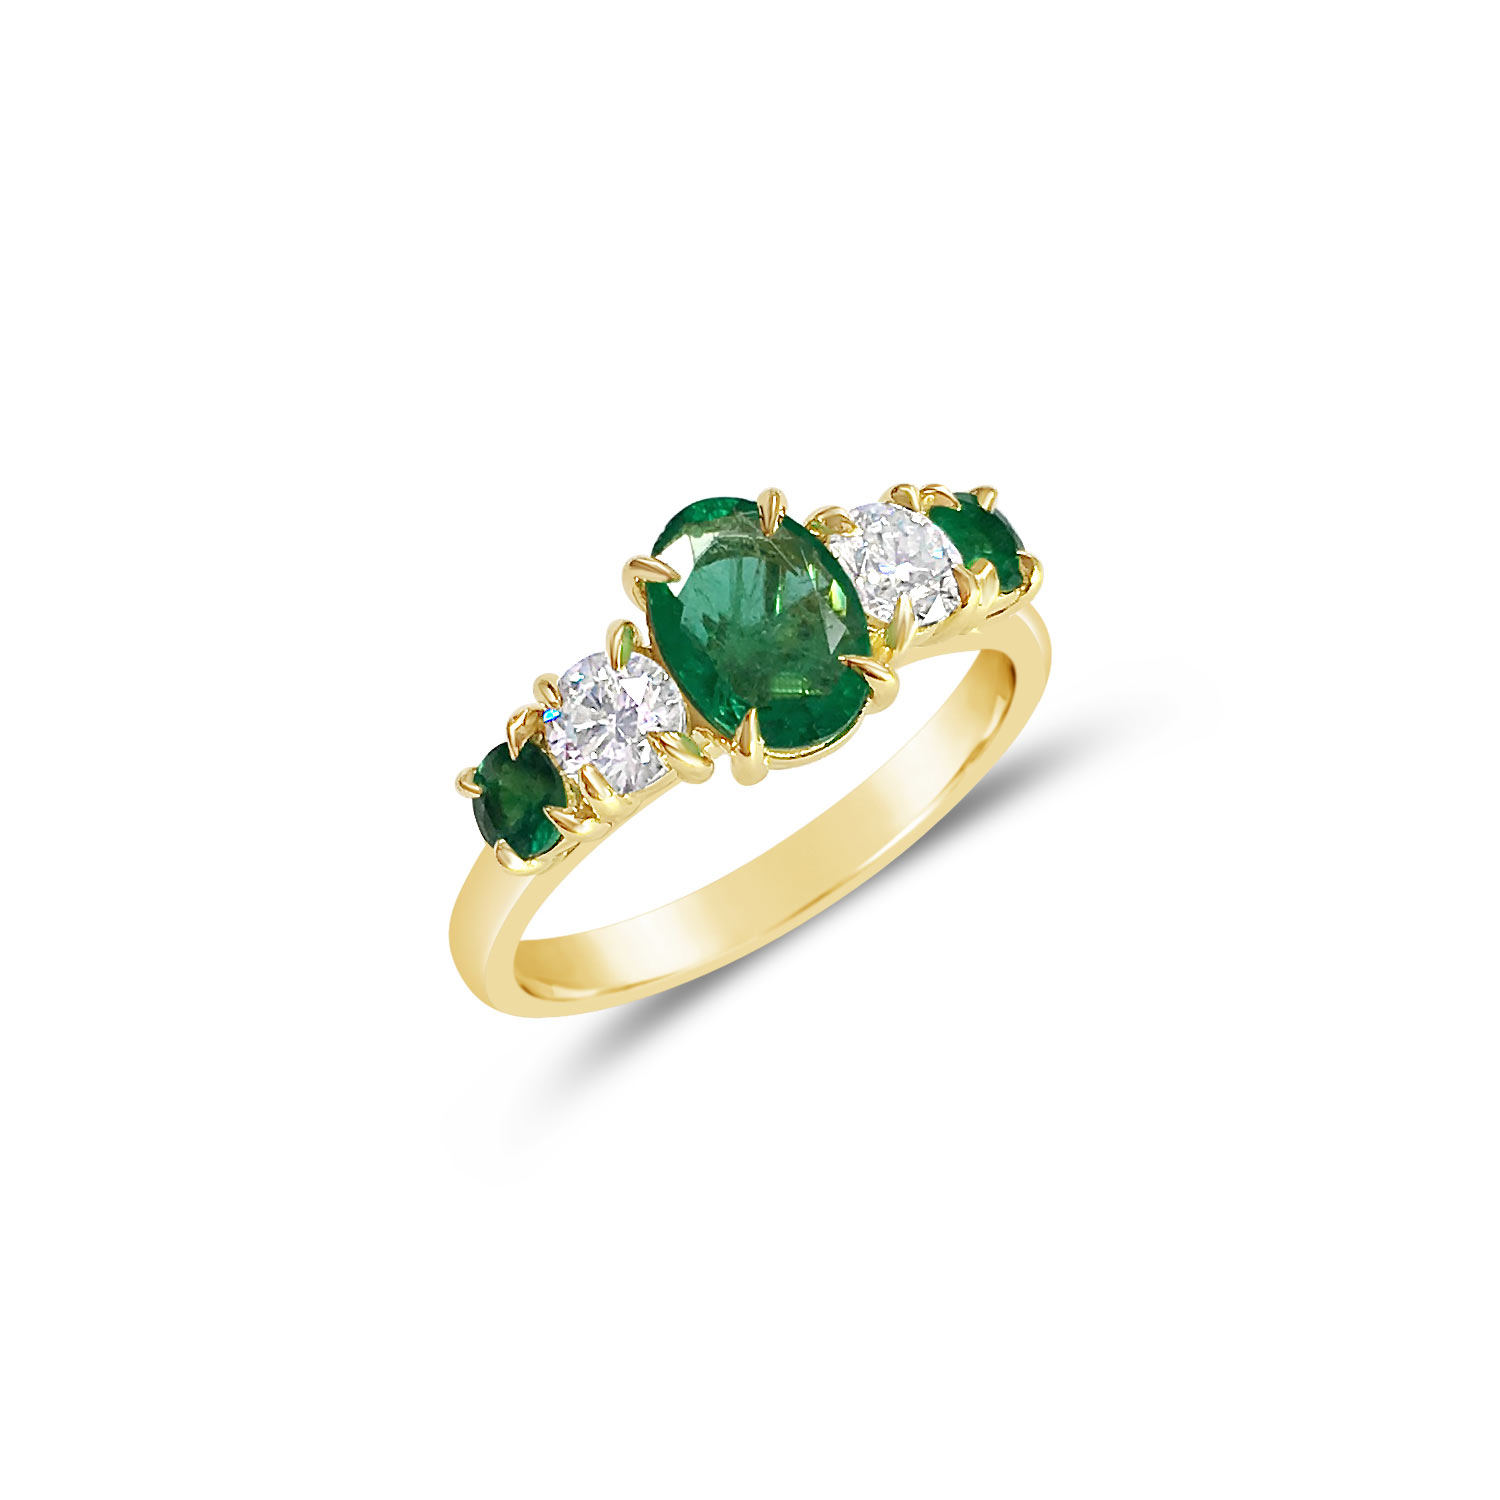 Bespoke emerald and diamond claw-set five-stone ring, mounted in 18ct yellow gold top